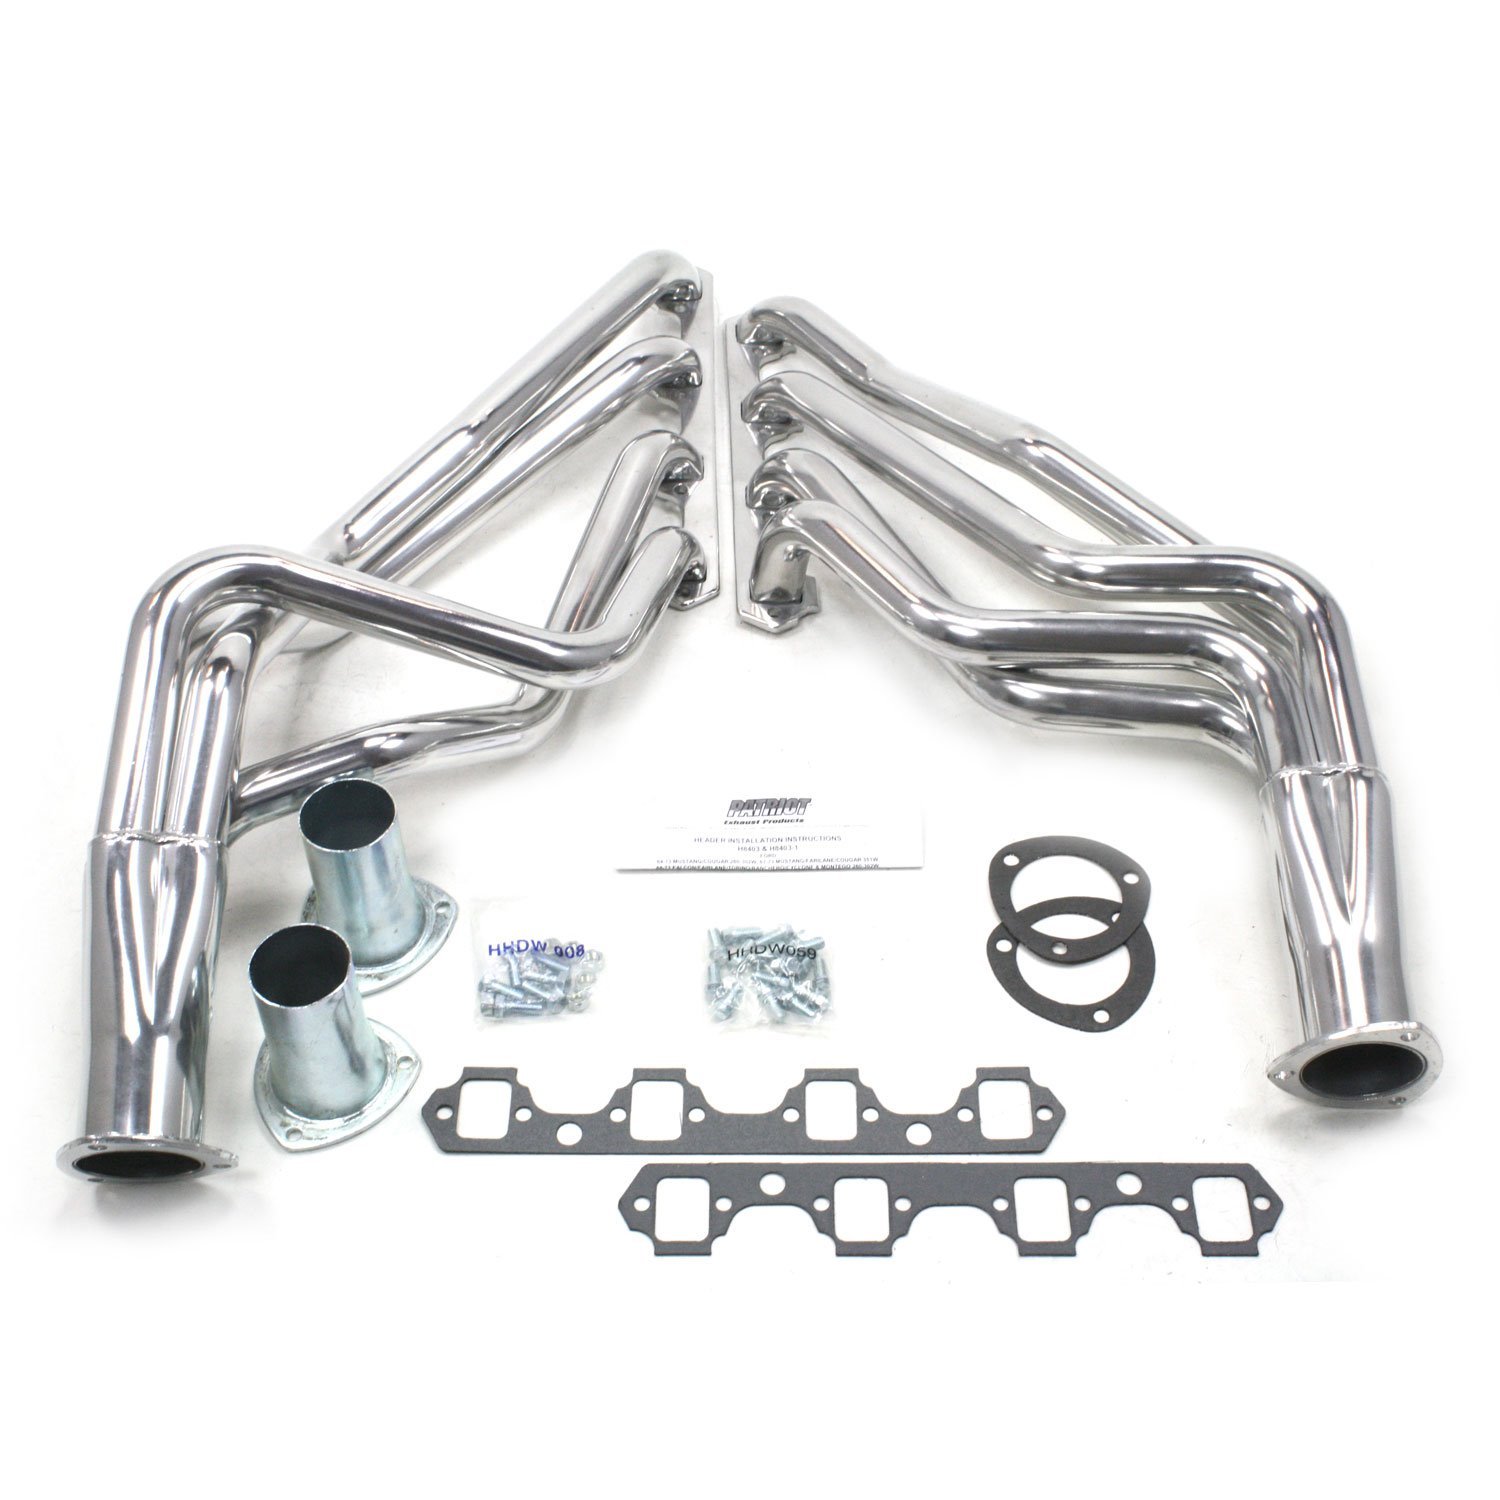 H8403-1 Ford Specific Fit Headers 1967-1973 Ford Mustang/Cougar